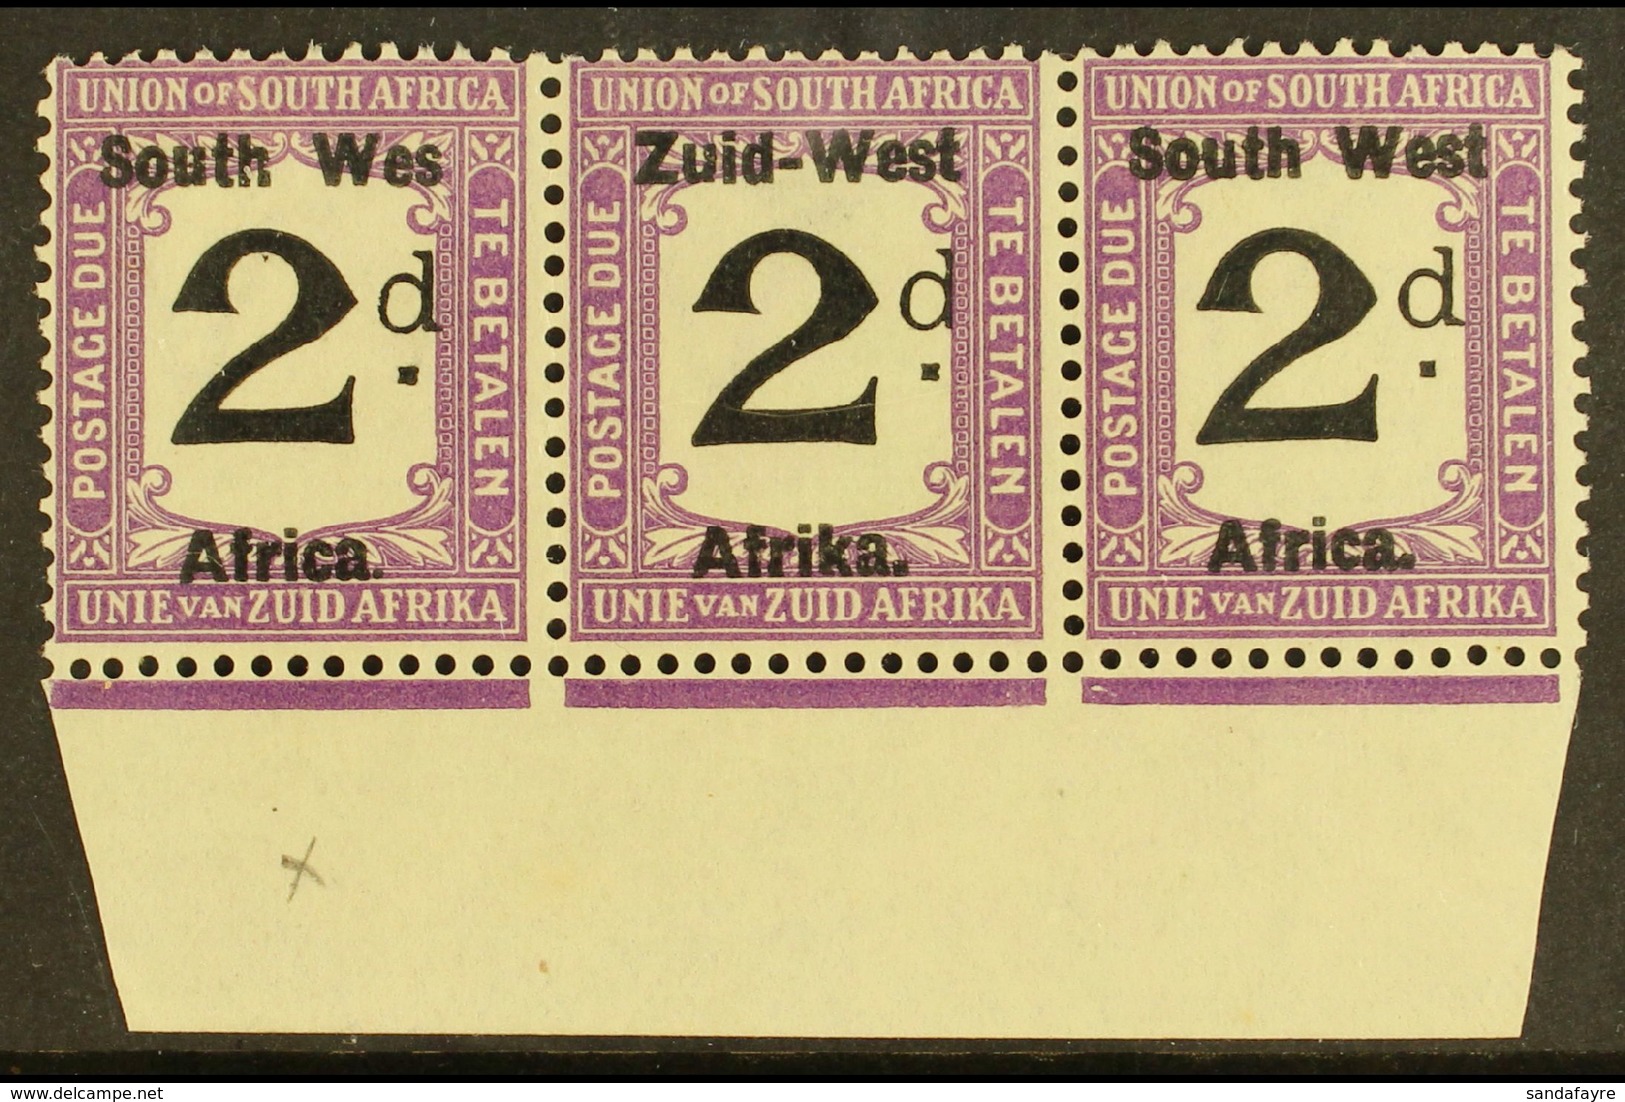 POSTAGE DUES  1923 2d Black And Violet, Marginal Strip Of 3, One Showing Variety "Wes For West", SG D3a, Very Fine NHM.  - Africa Del Sud-Ovest (1923-1990)